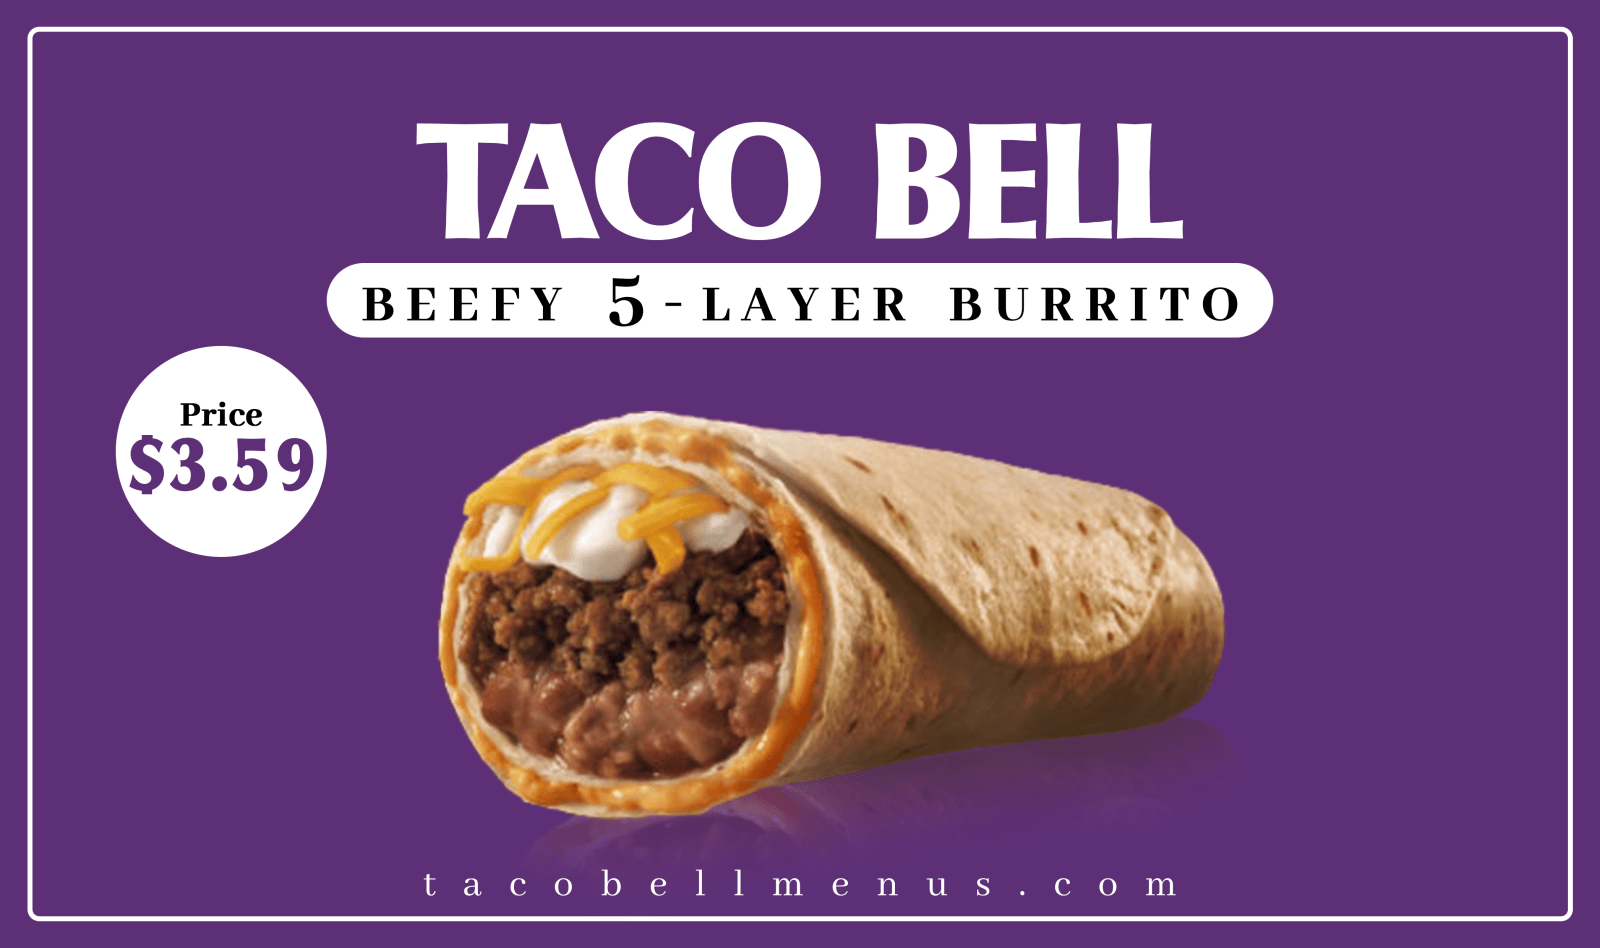 Taco Bell Beefy 5-Layer Burrito, taco bell 5 layer burrito calories, 5 layer bean burrito taco bell, taco bell 5 layer burrito recipe, beefy 5 layer burrito price, beefy 5 layer burrito Nutritions,